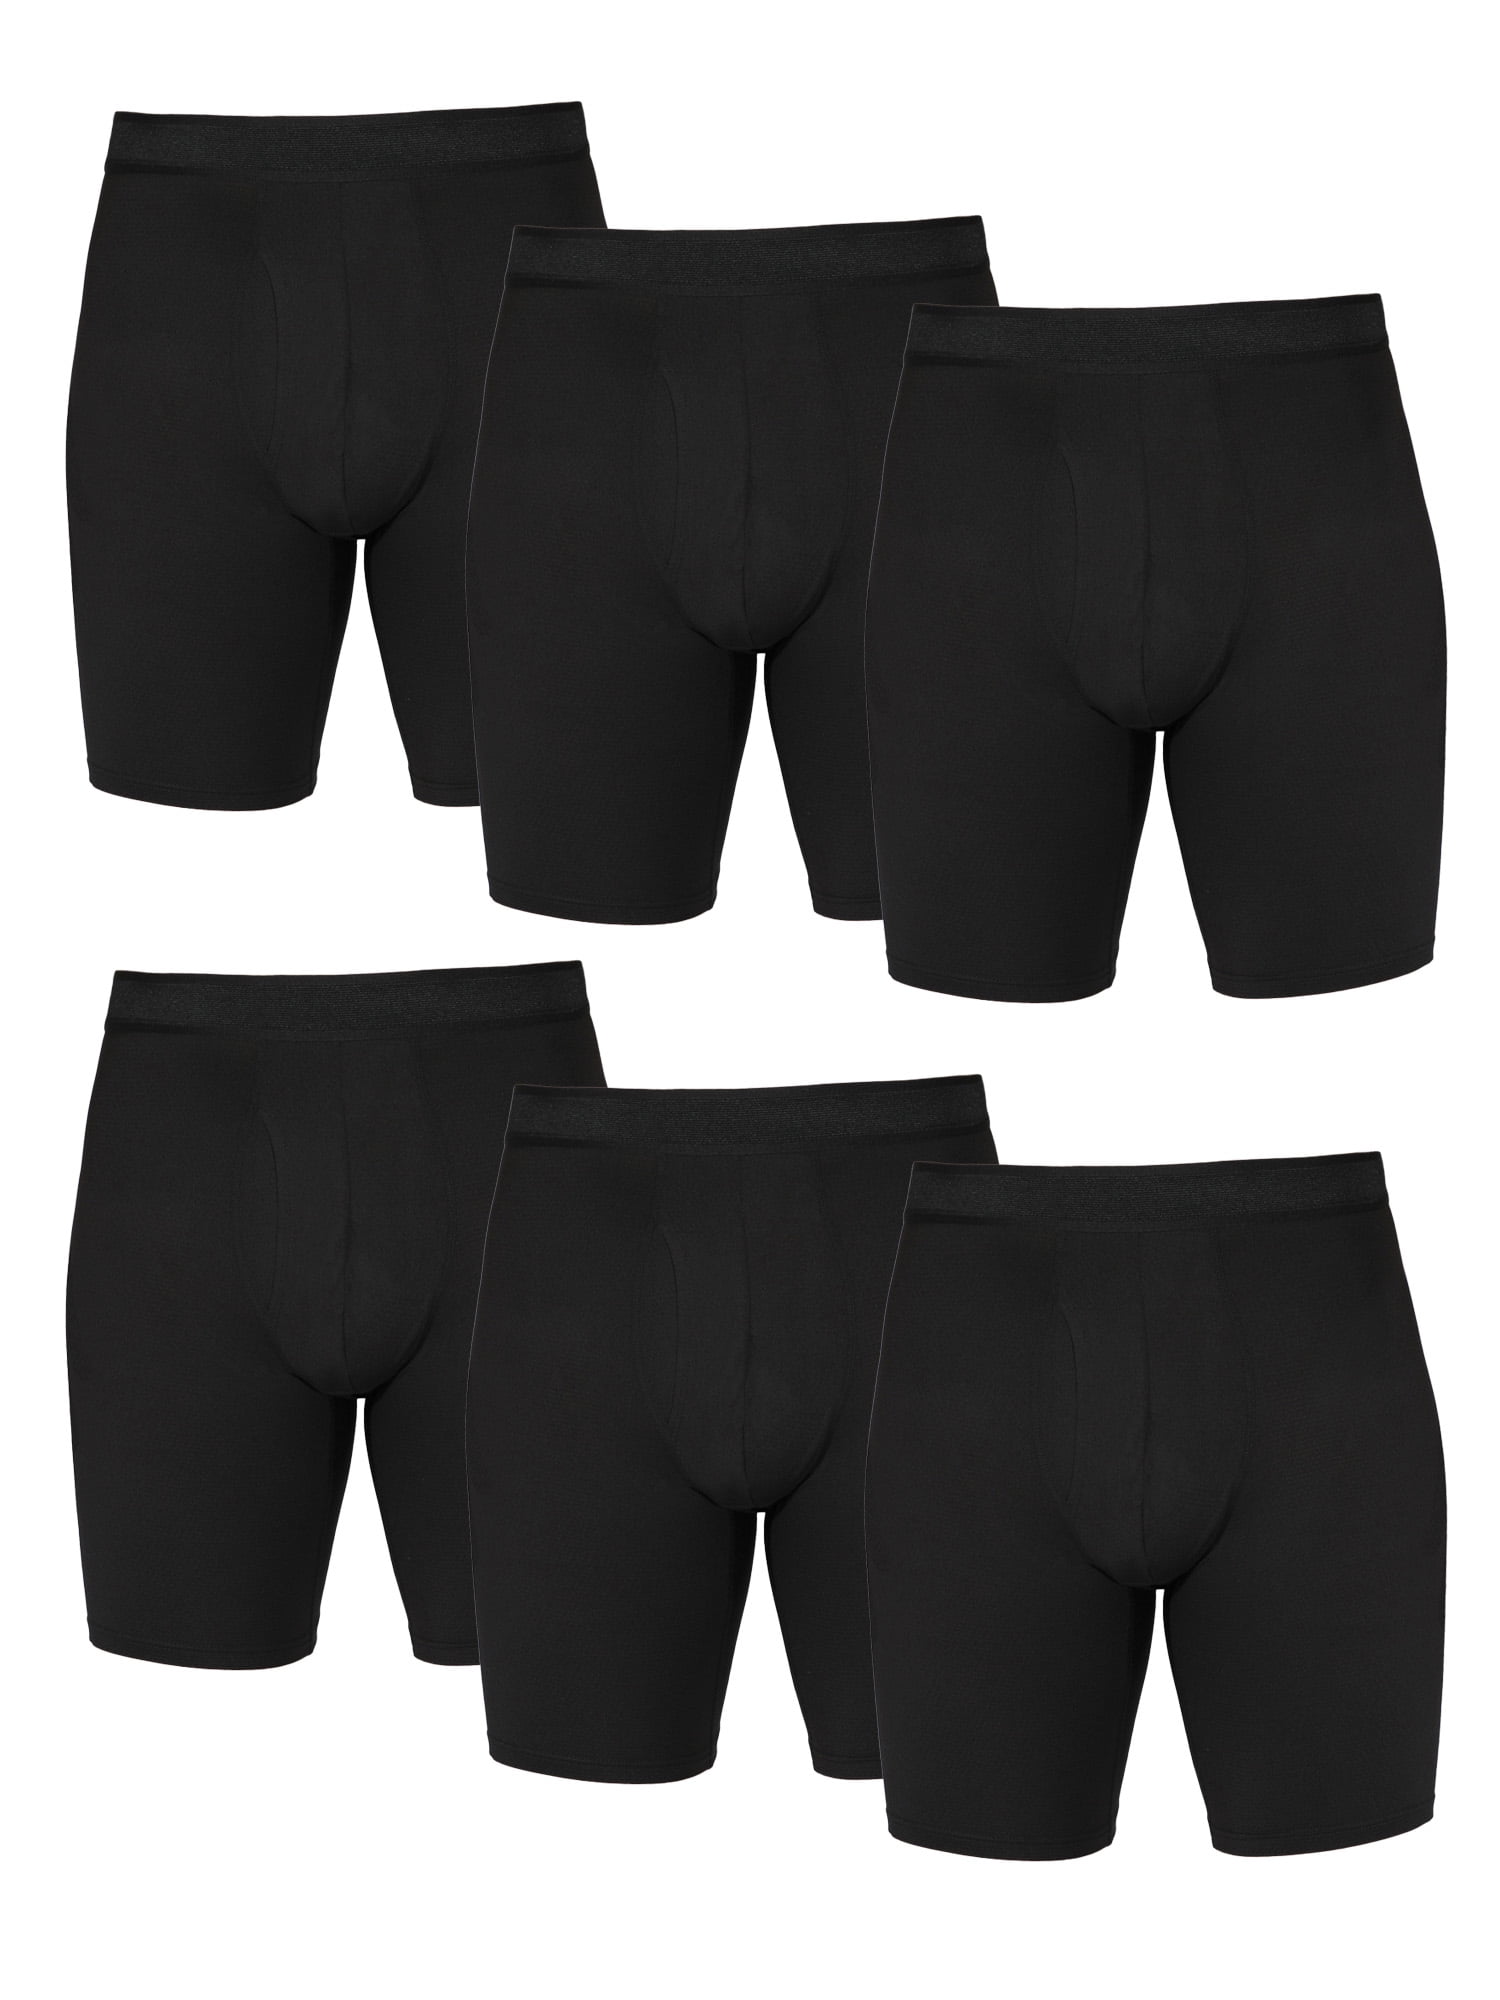 Body Wrappers Low Rise Athletic Brief in Black and White Different Sizes 